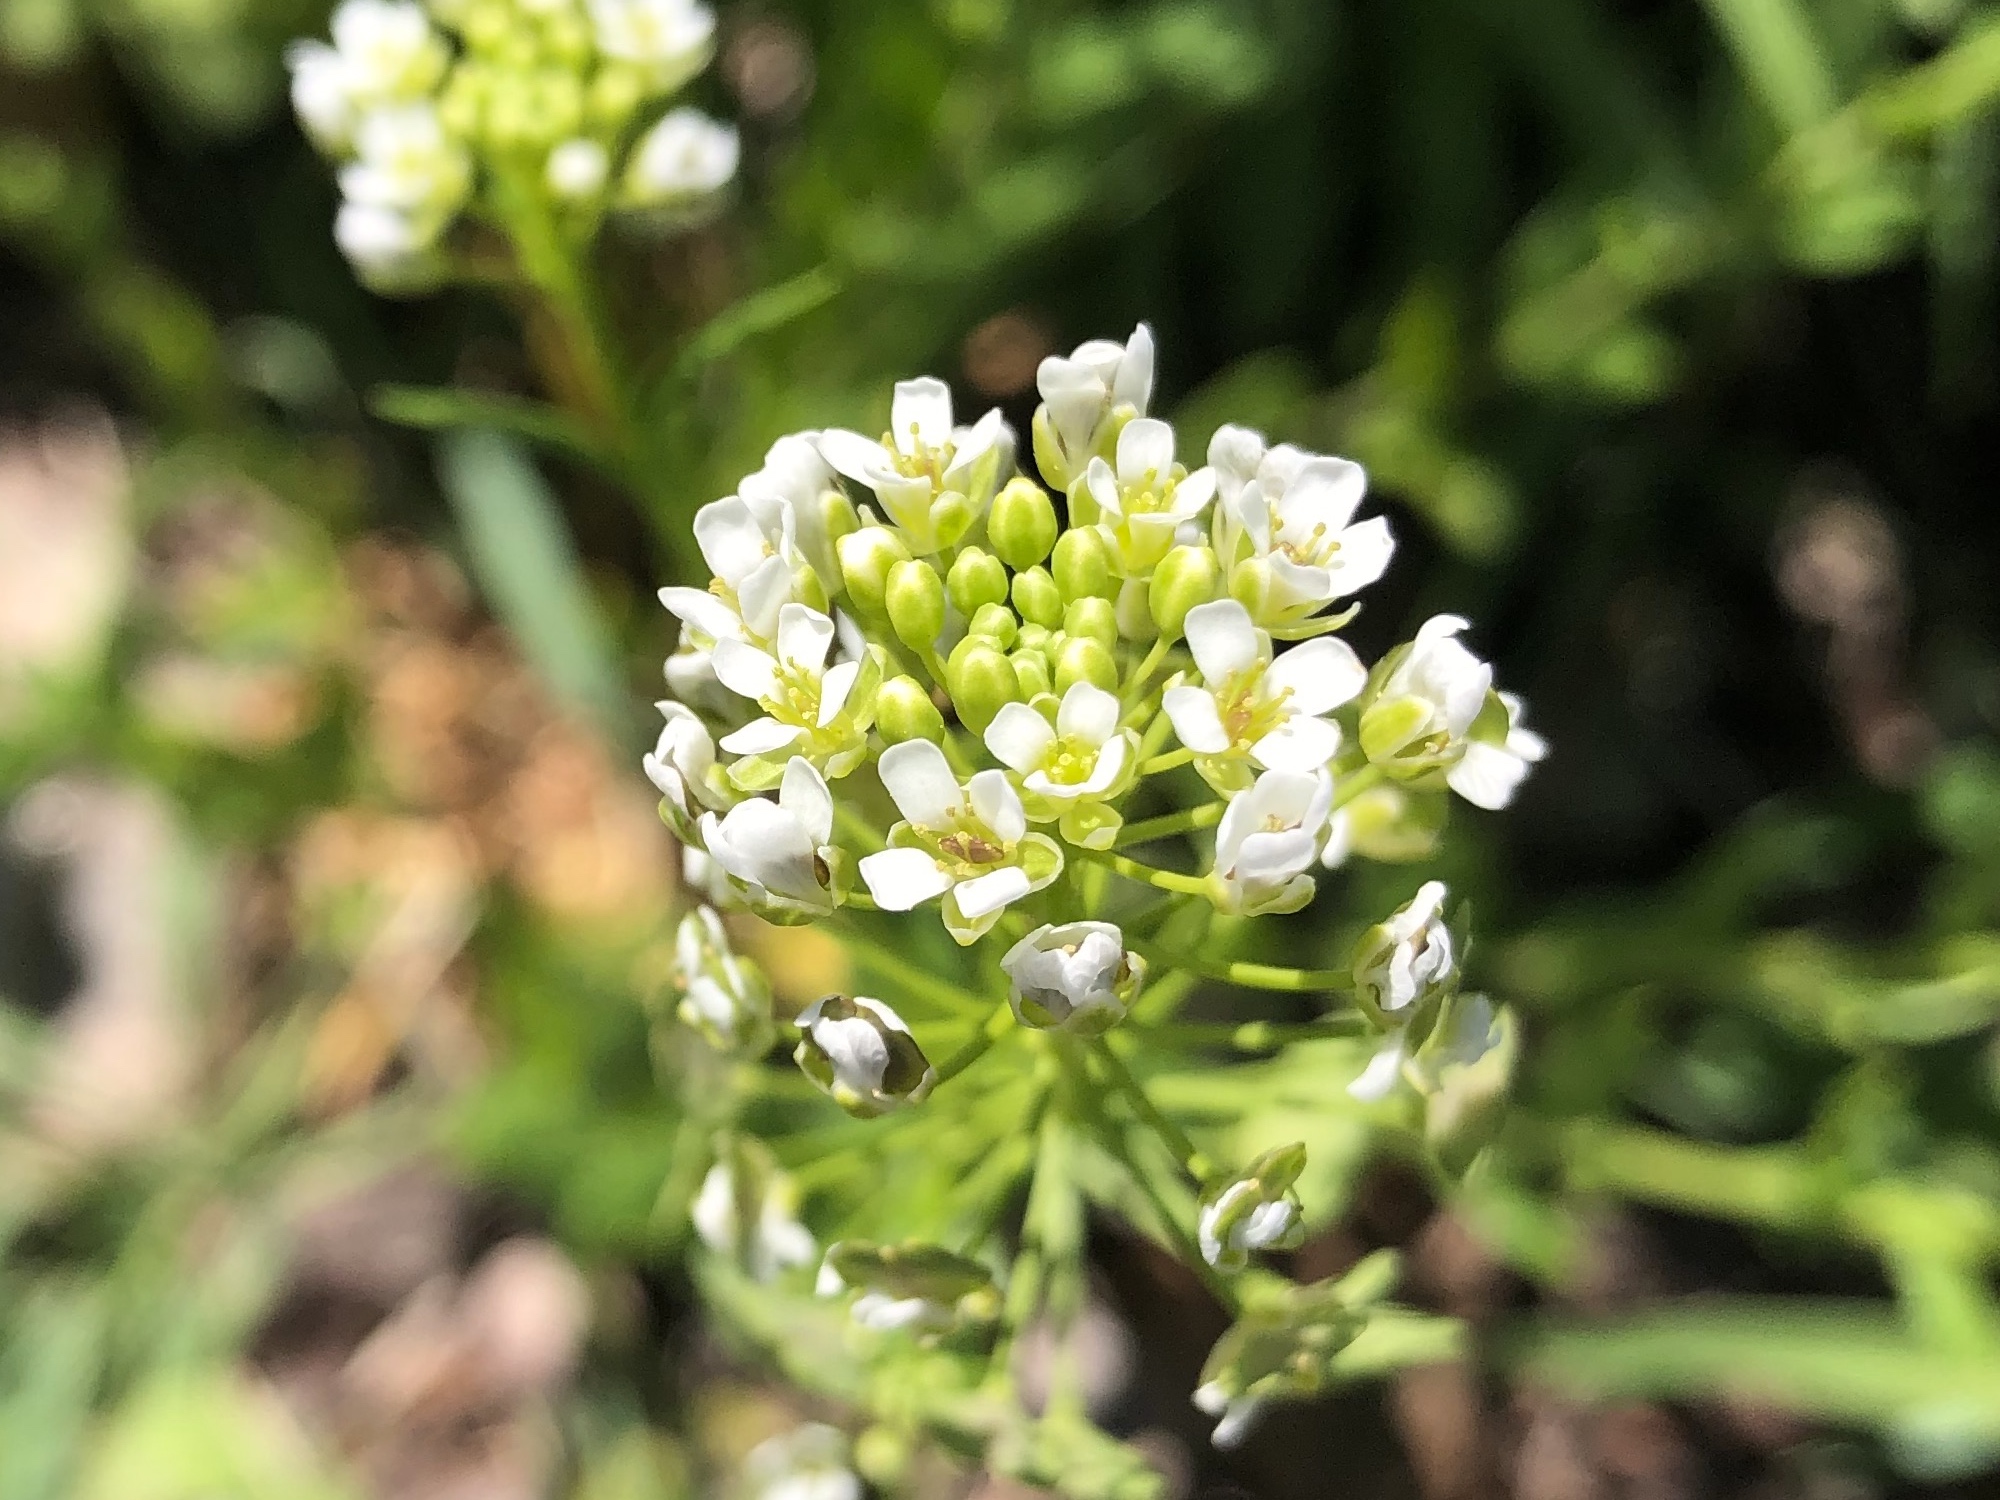 Field Pennycress near retaining pond on corner of Manitou Way and Nakoma Road in Madison, Wisconsin on May 5, 2021.